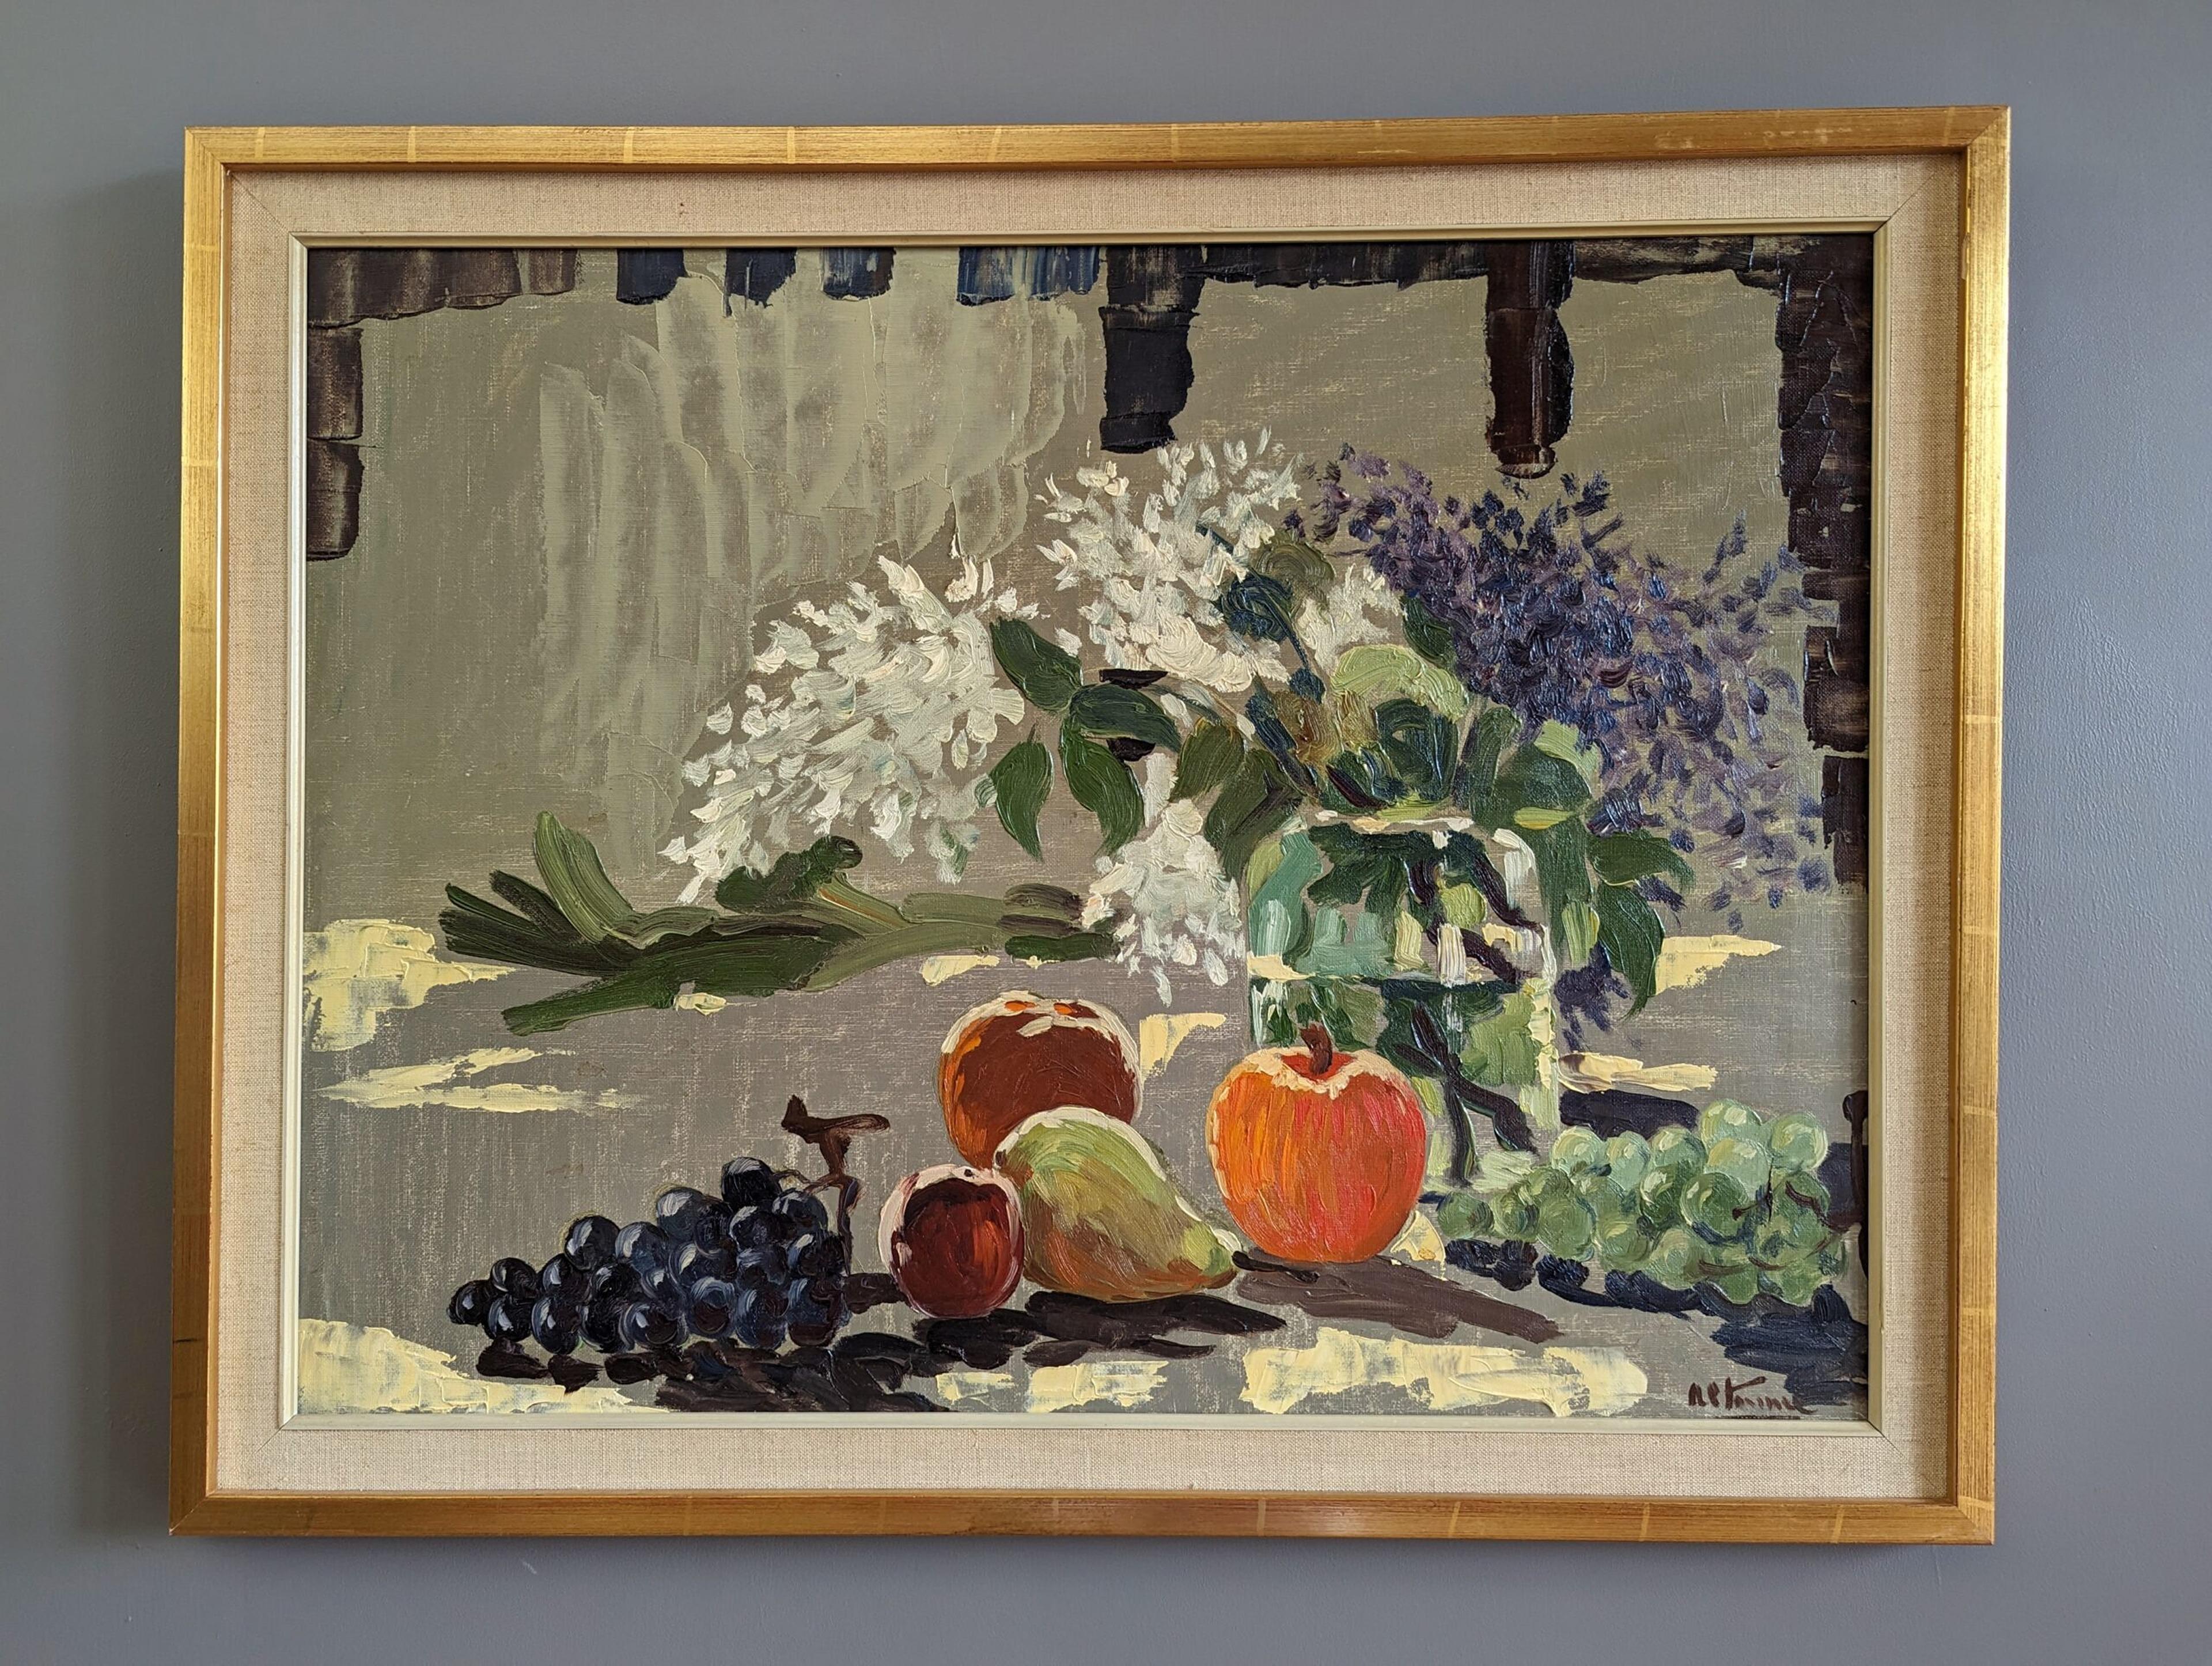 RIPE
Size: 58 x 74 cm (including frame)
Oil on Canvas

An expressive and richly coloured mid-century still life composition, executed in oil onto canvas.

Set against a beige backdrop rests a jar of white and purple flowers as well as an assortment